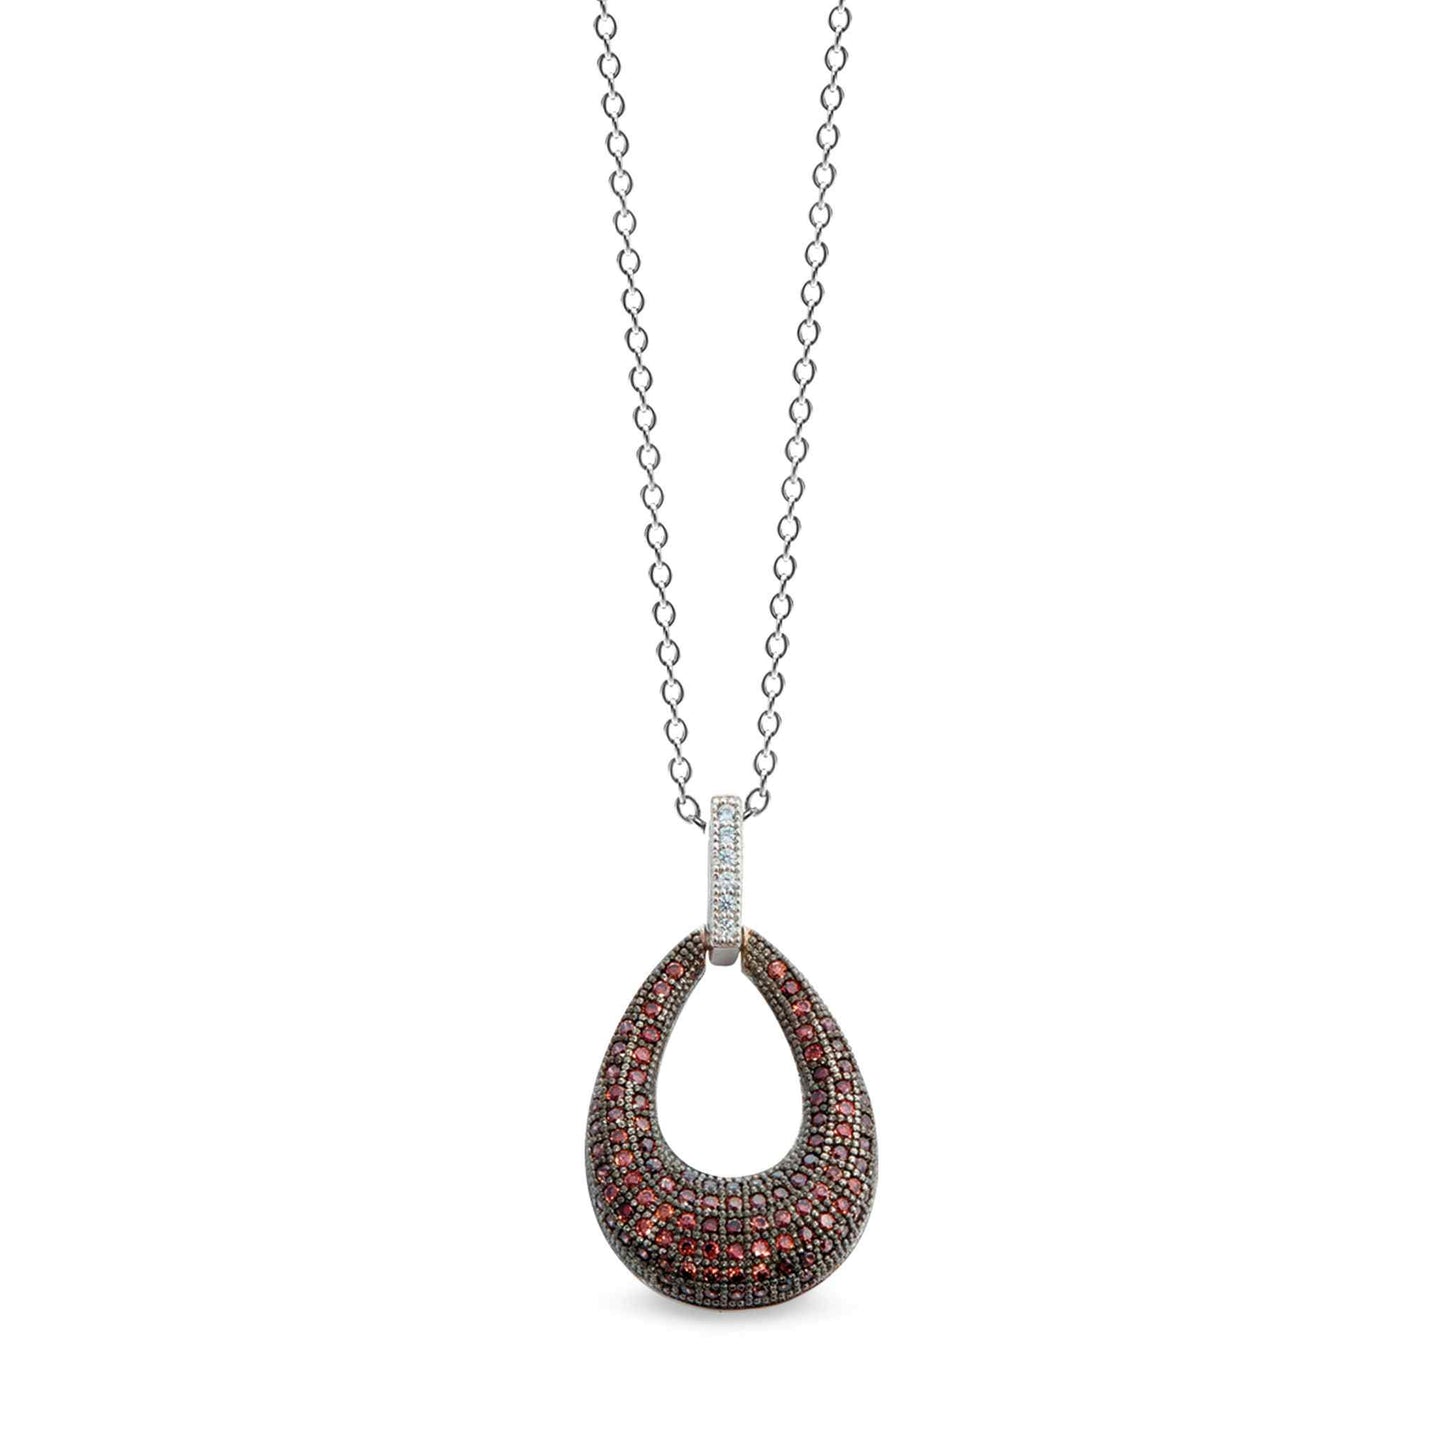 A platinum & black sterling silver two tone teardrop pendant with brown simulated diamonds displayed on a neutral white background.